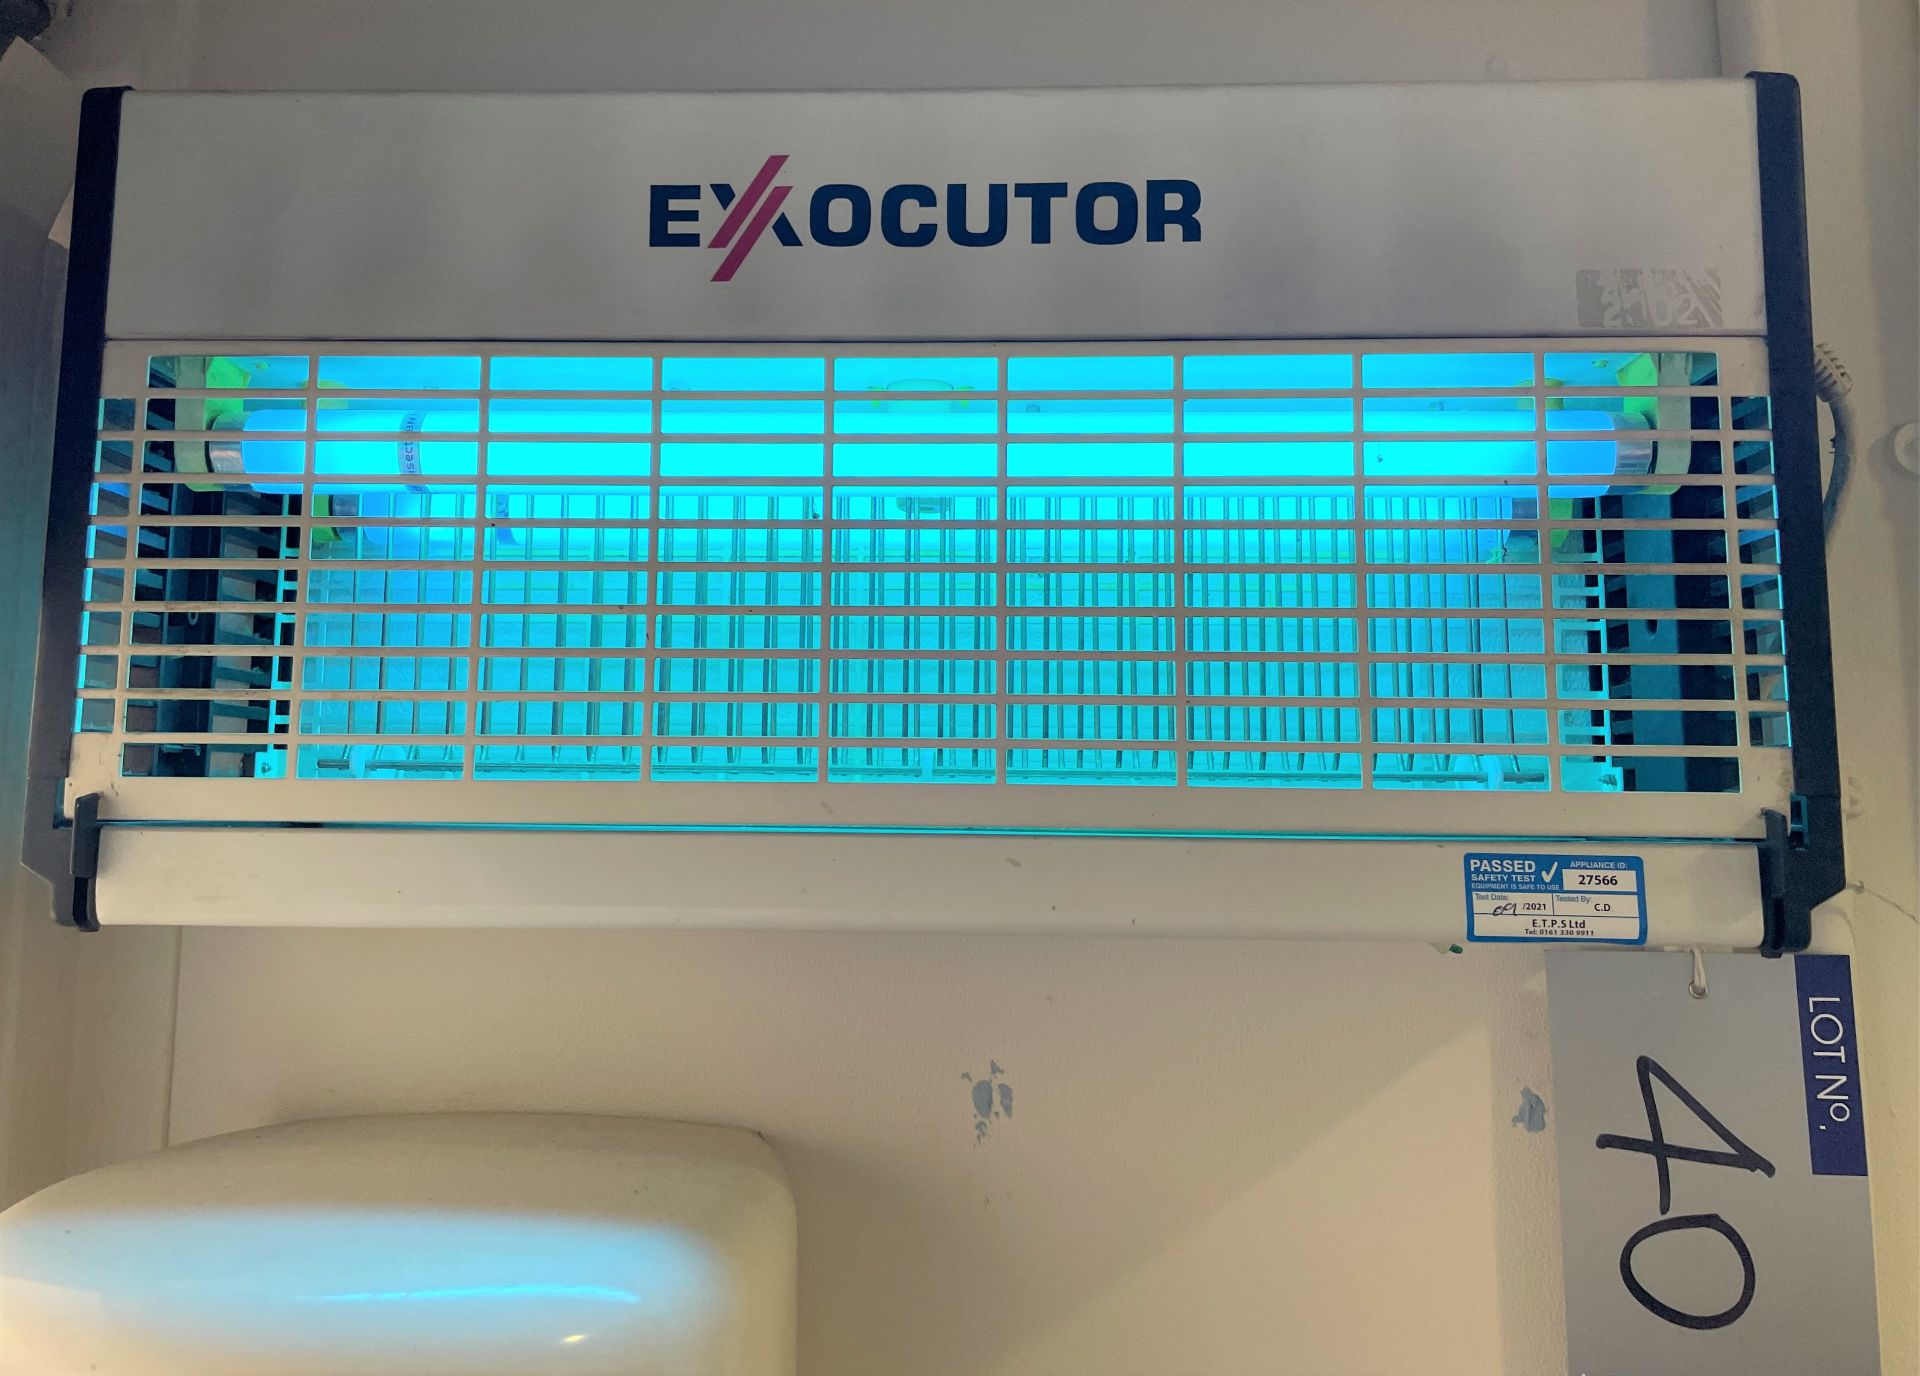 A P+L Systems Exocutor EX30 Insect Eradicator.